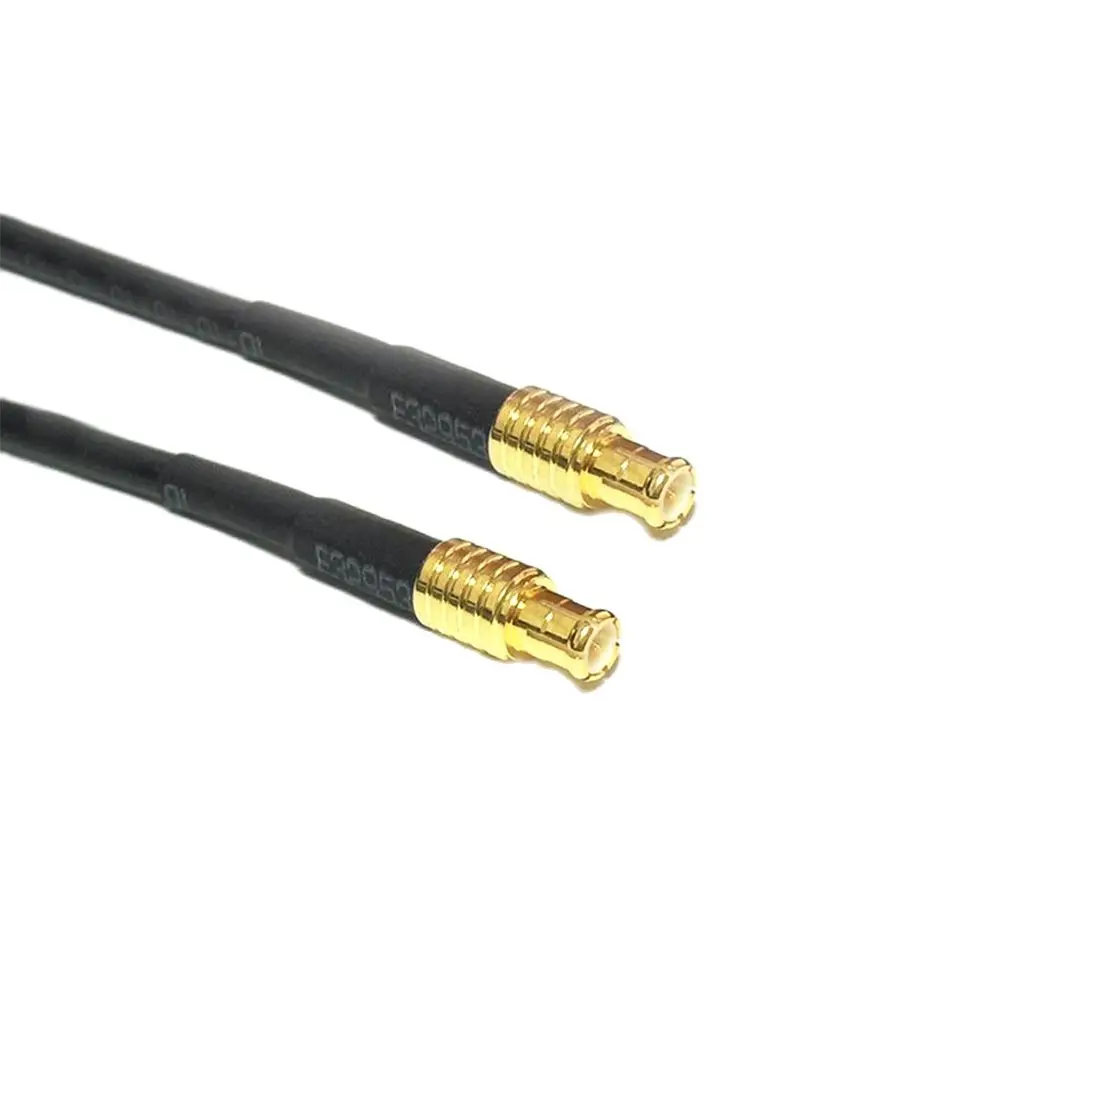 

1pc MCX Male to MCX Male Straight/Right Angle Plug Pigtail Cable RG174 15cm/30cm/50cm for Wireless Modem Card New